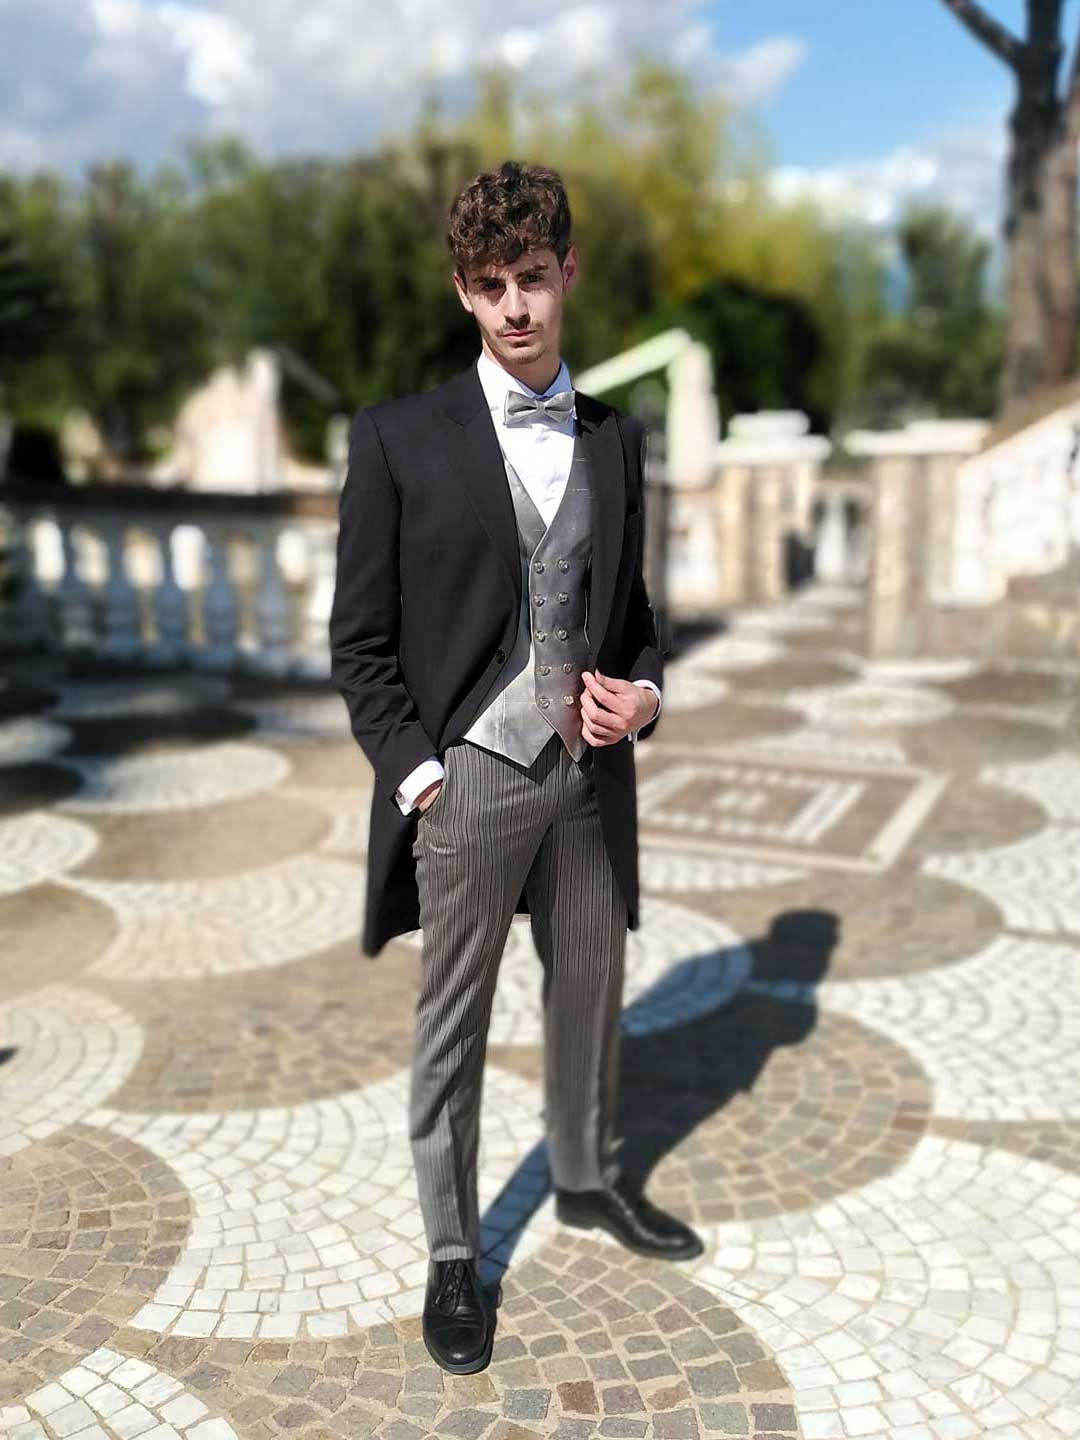 Frac tight tailoring man suits. Tailor italian style draw custom groom clothing. Buy tailored men’s suit made in italy project design clothes online